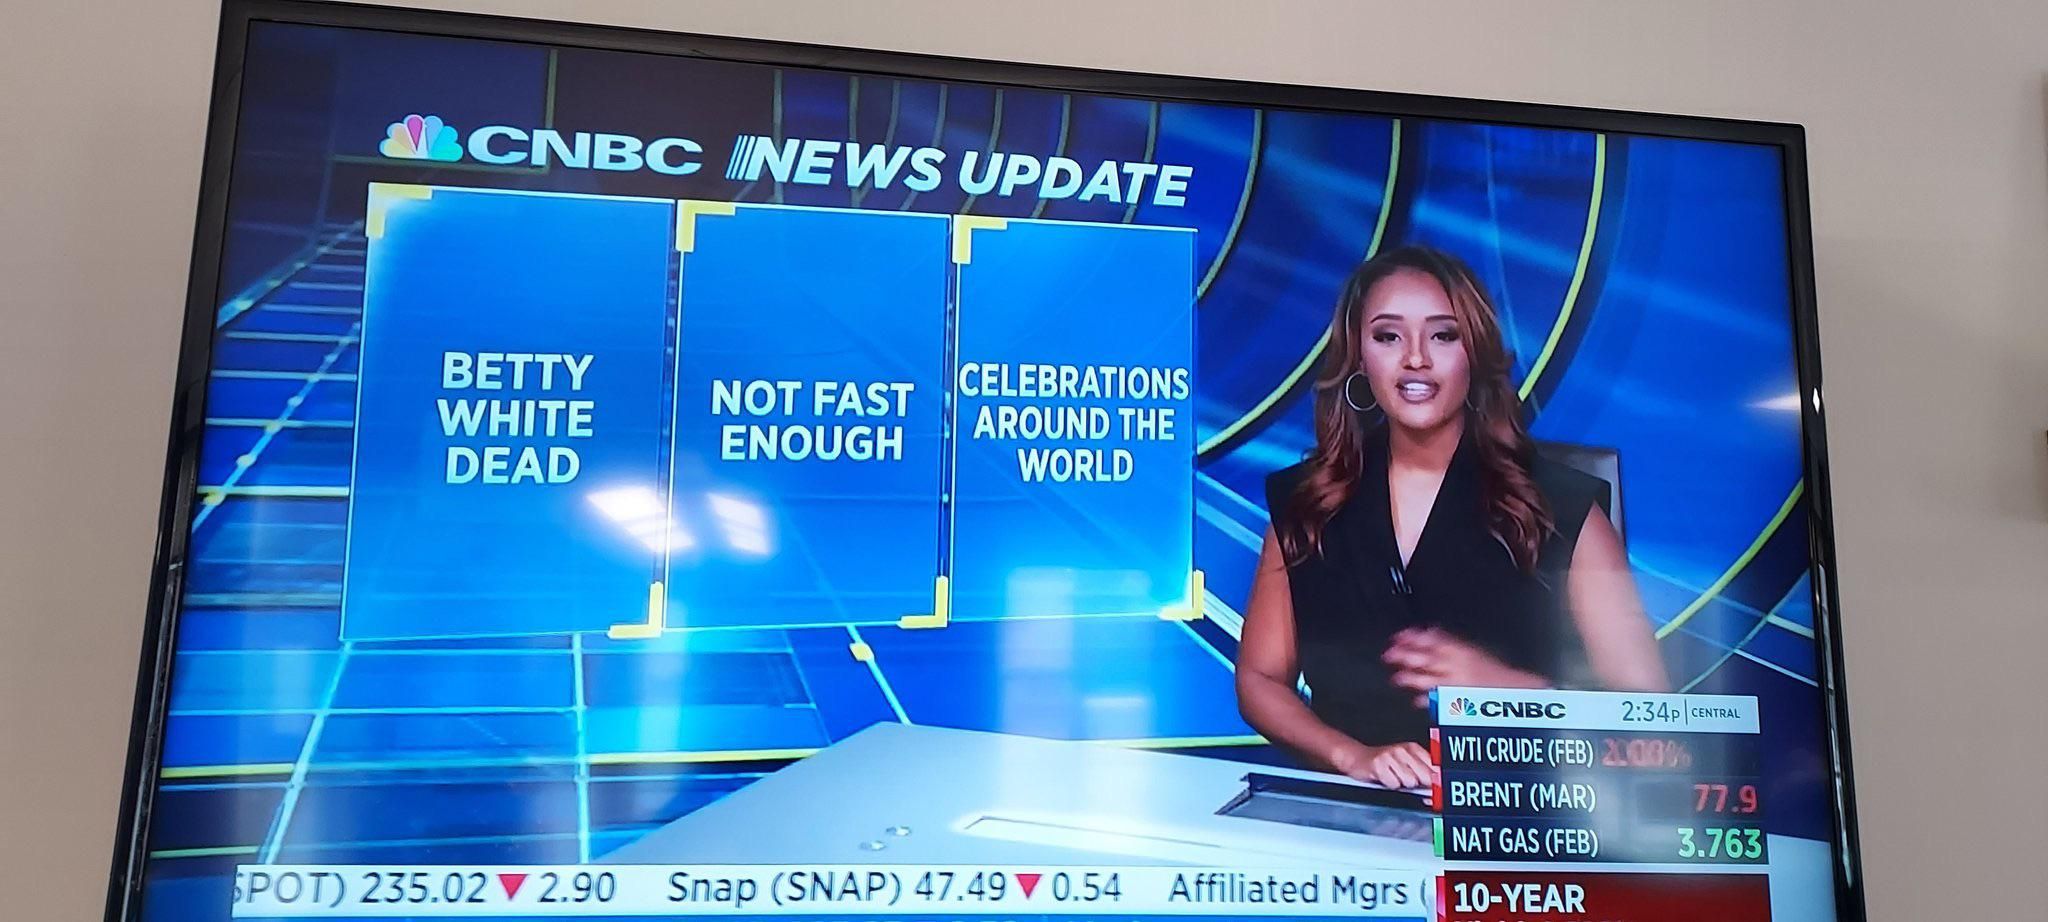 Betty White would love this graphic CNBC just put up